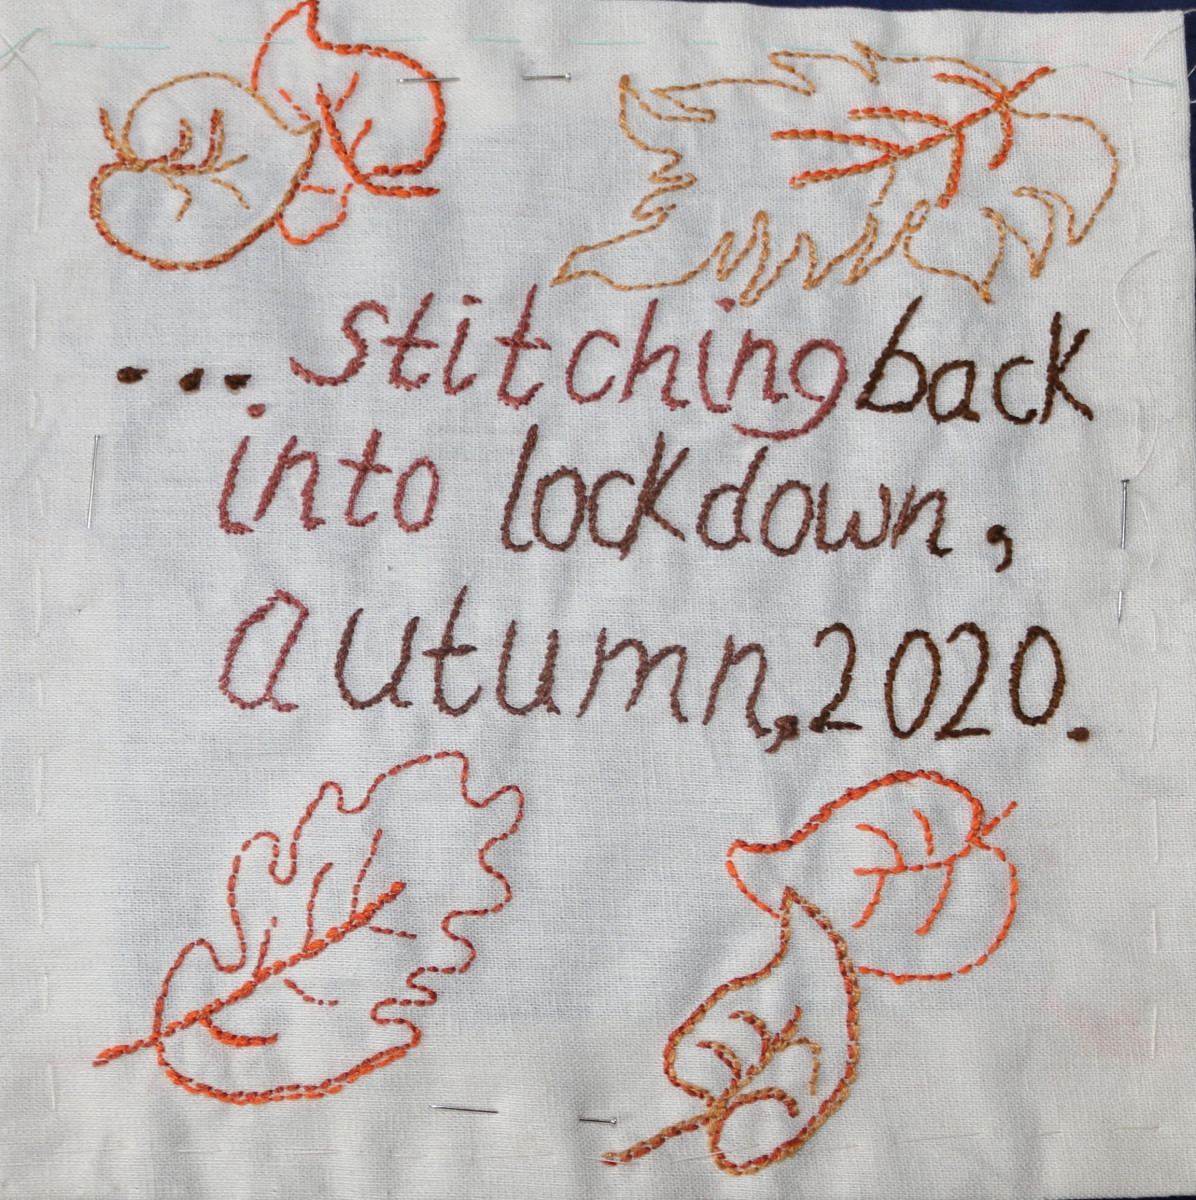 Embroidery of leaves and words: stitching back into lockdown, Autumn 2020